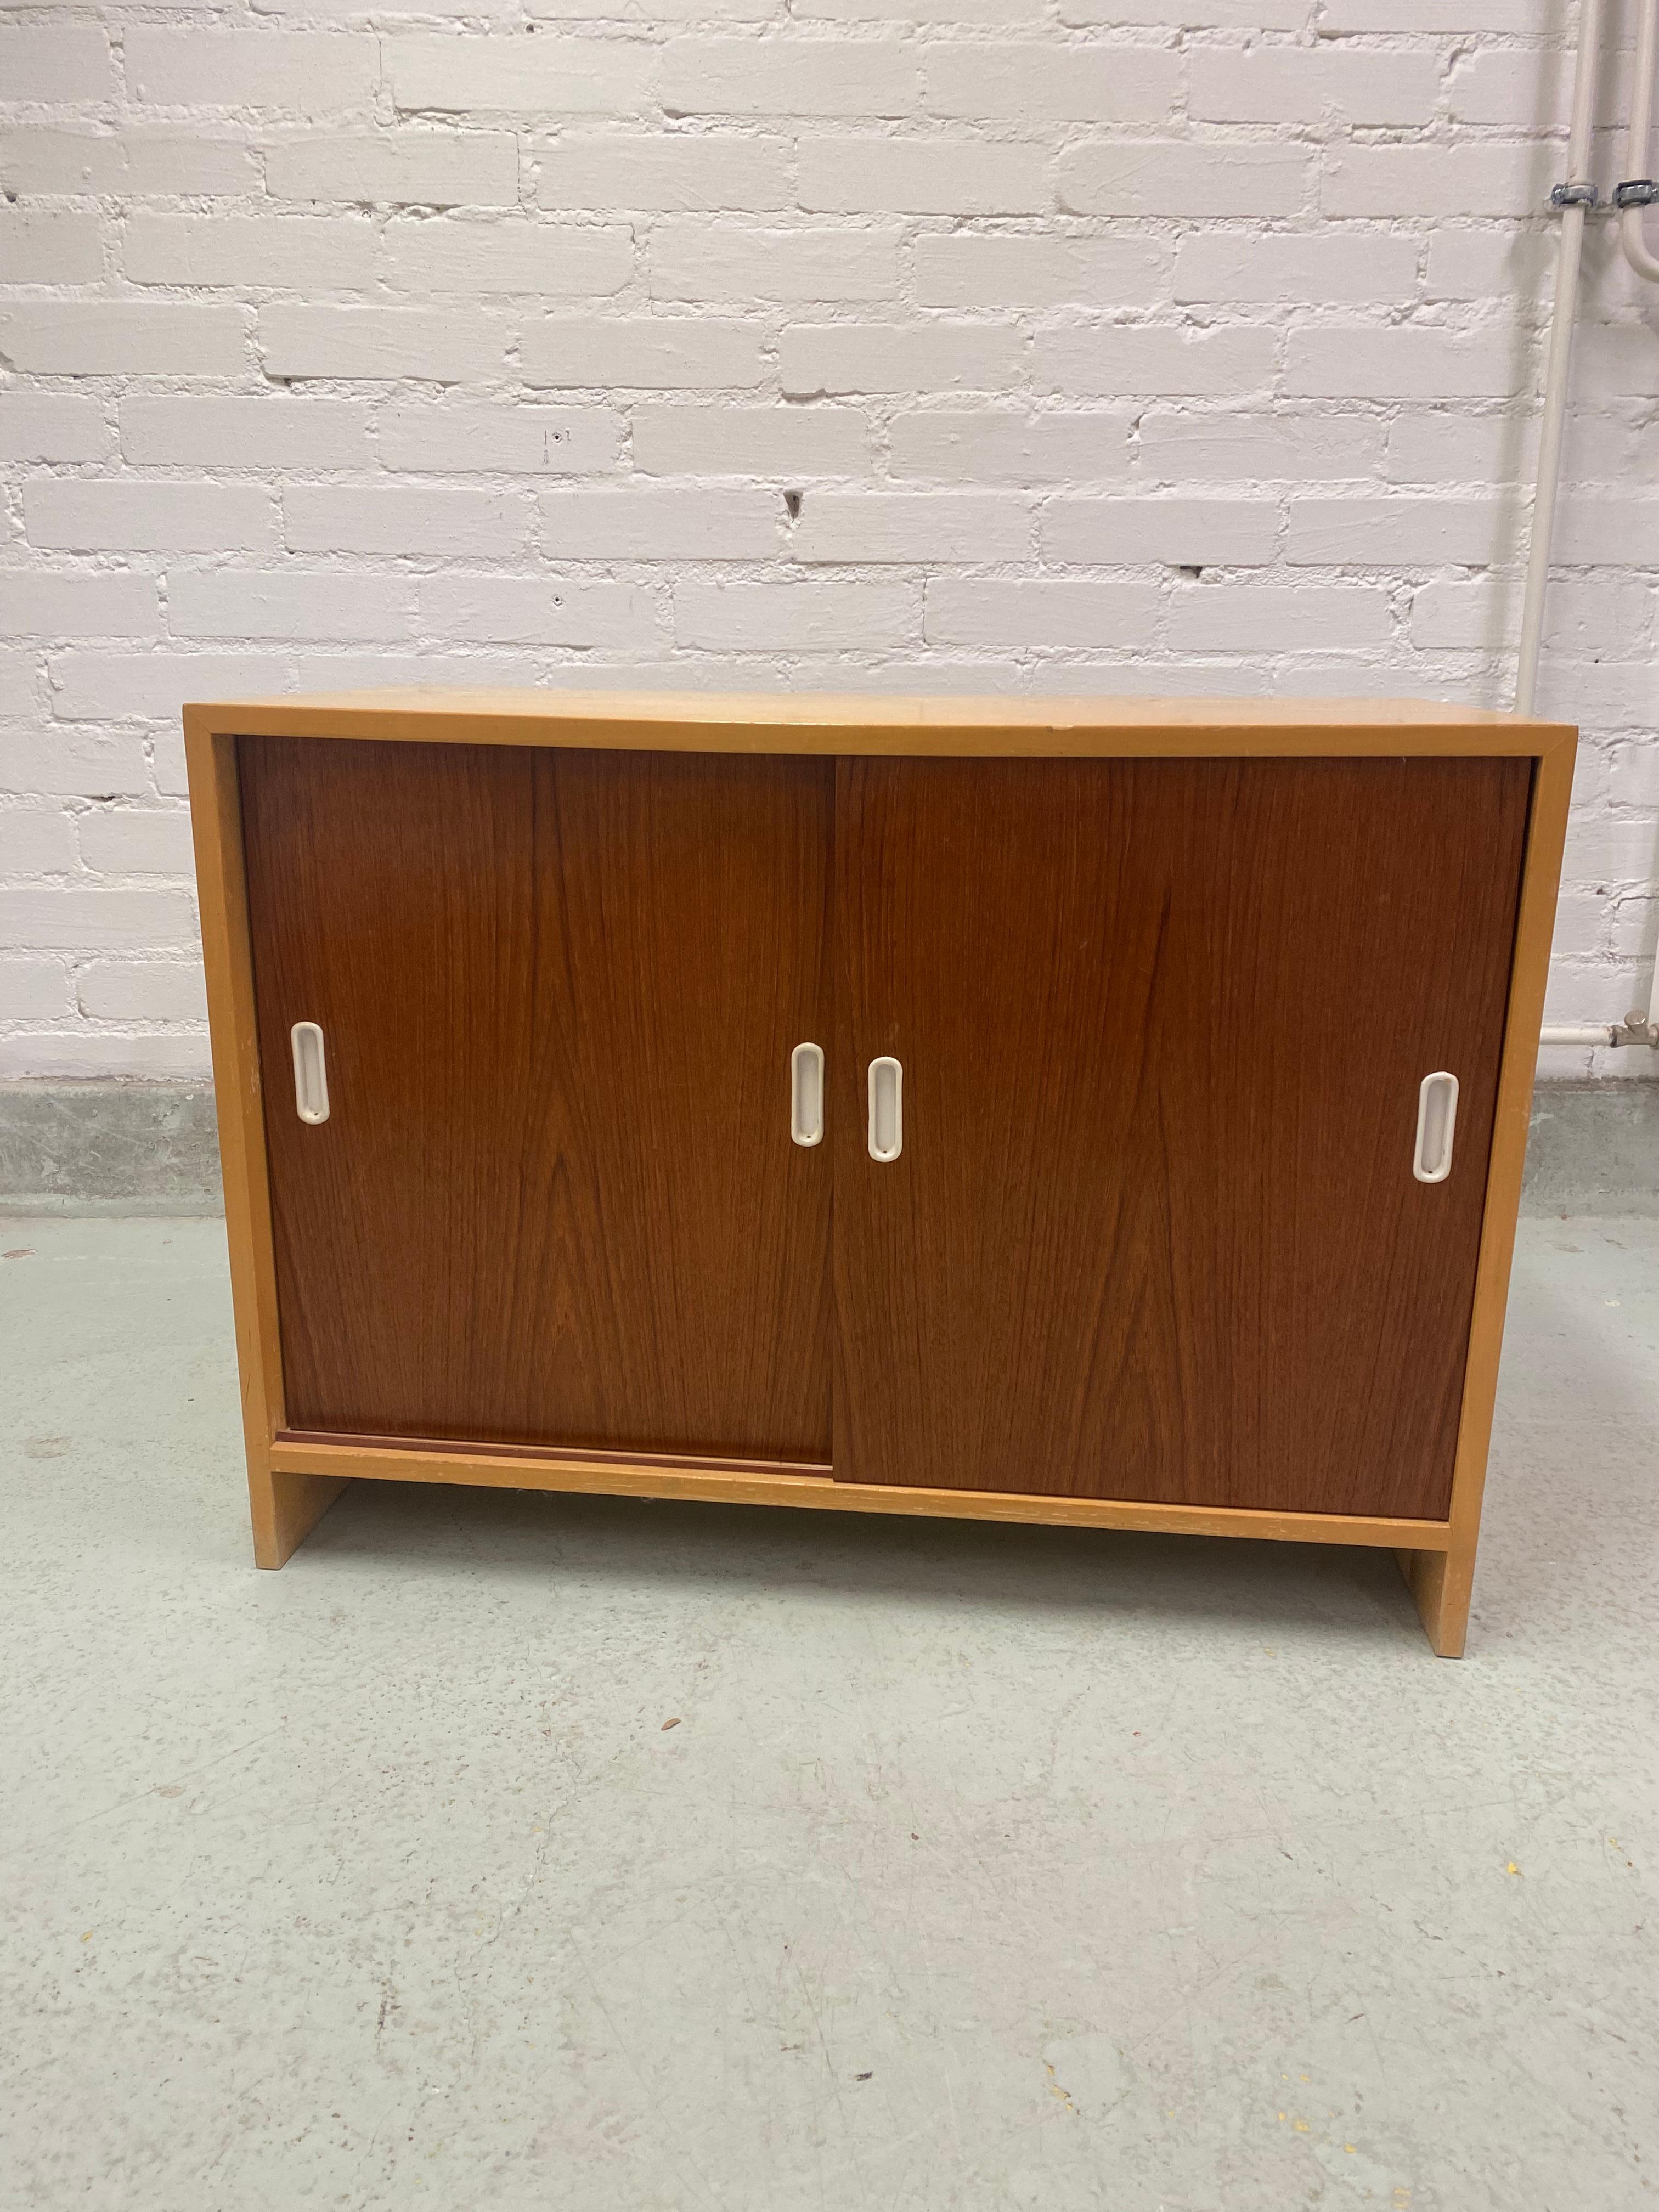 Aino Aalto cabinet model 217, manufactured by Oy Huonekalu-ja Rakennustyötehdas Ab in the 1950s. The outer part is birch and the doors are teak, which the Aaltos did every now and then with their furnitures. The cabinet is in great condition with a